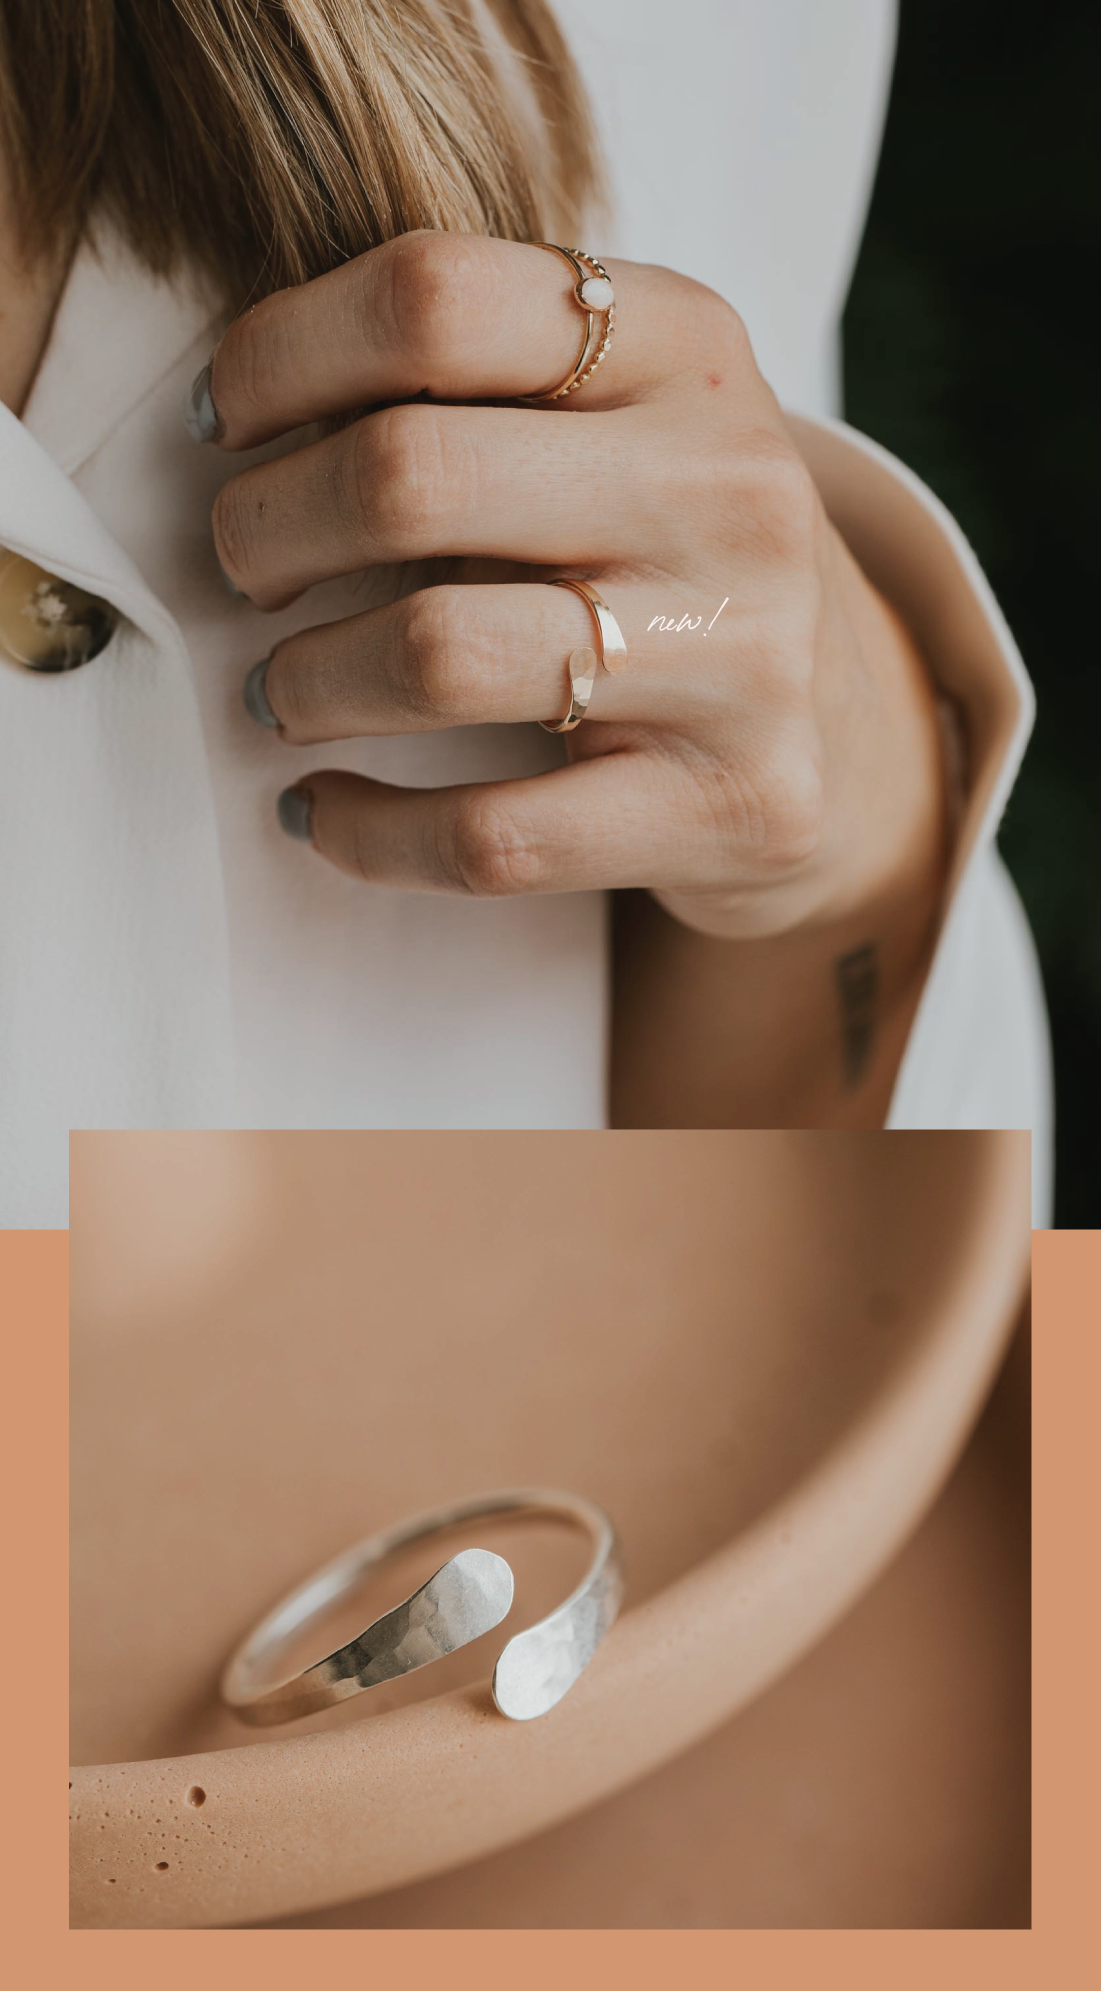 Hello Adorn launches new open Ring named Sonder after the meaning in the dictionary, styled with a gemstone ring with an opal stone, and a confetti hammered ring.